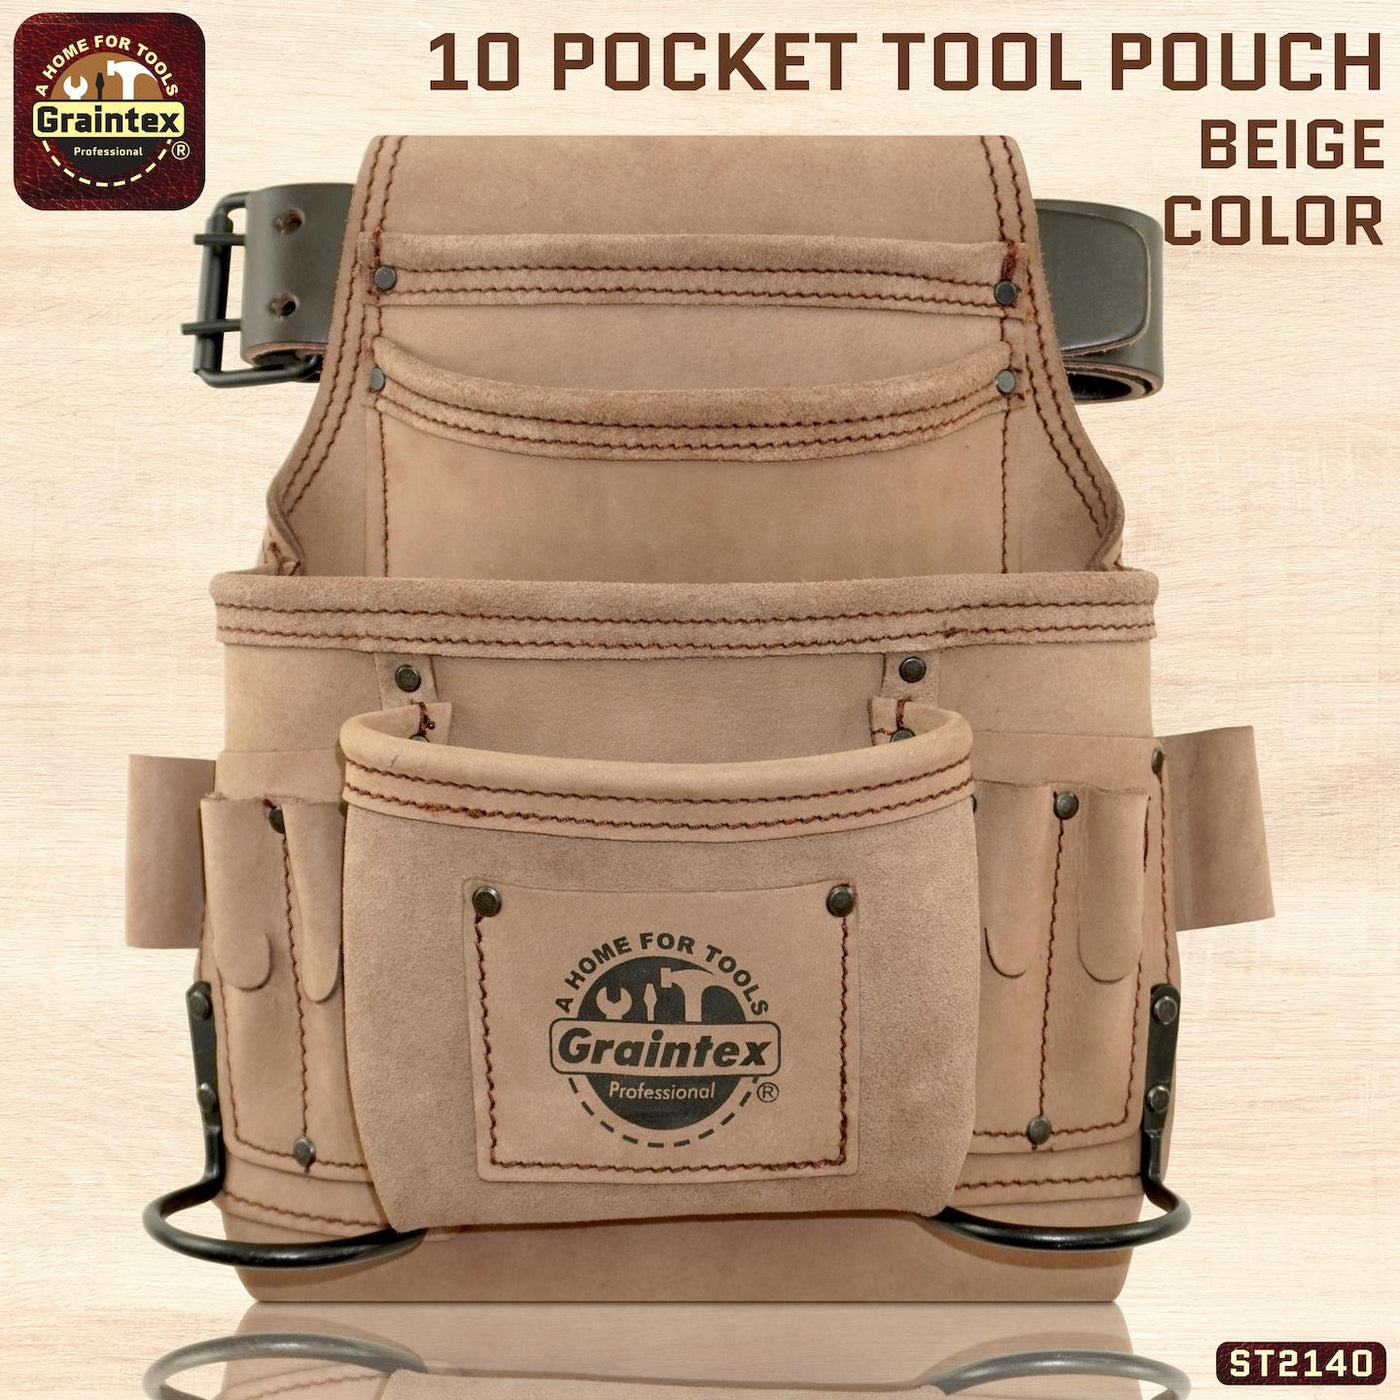 ST2140 :: 10 Pocket Nail & Tool Pouch Beige Color Top Grain Leather with 2" Leather Belt